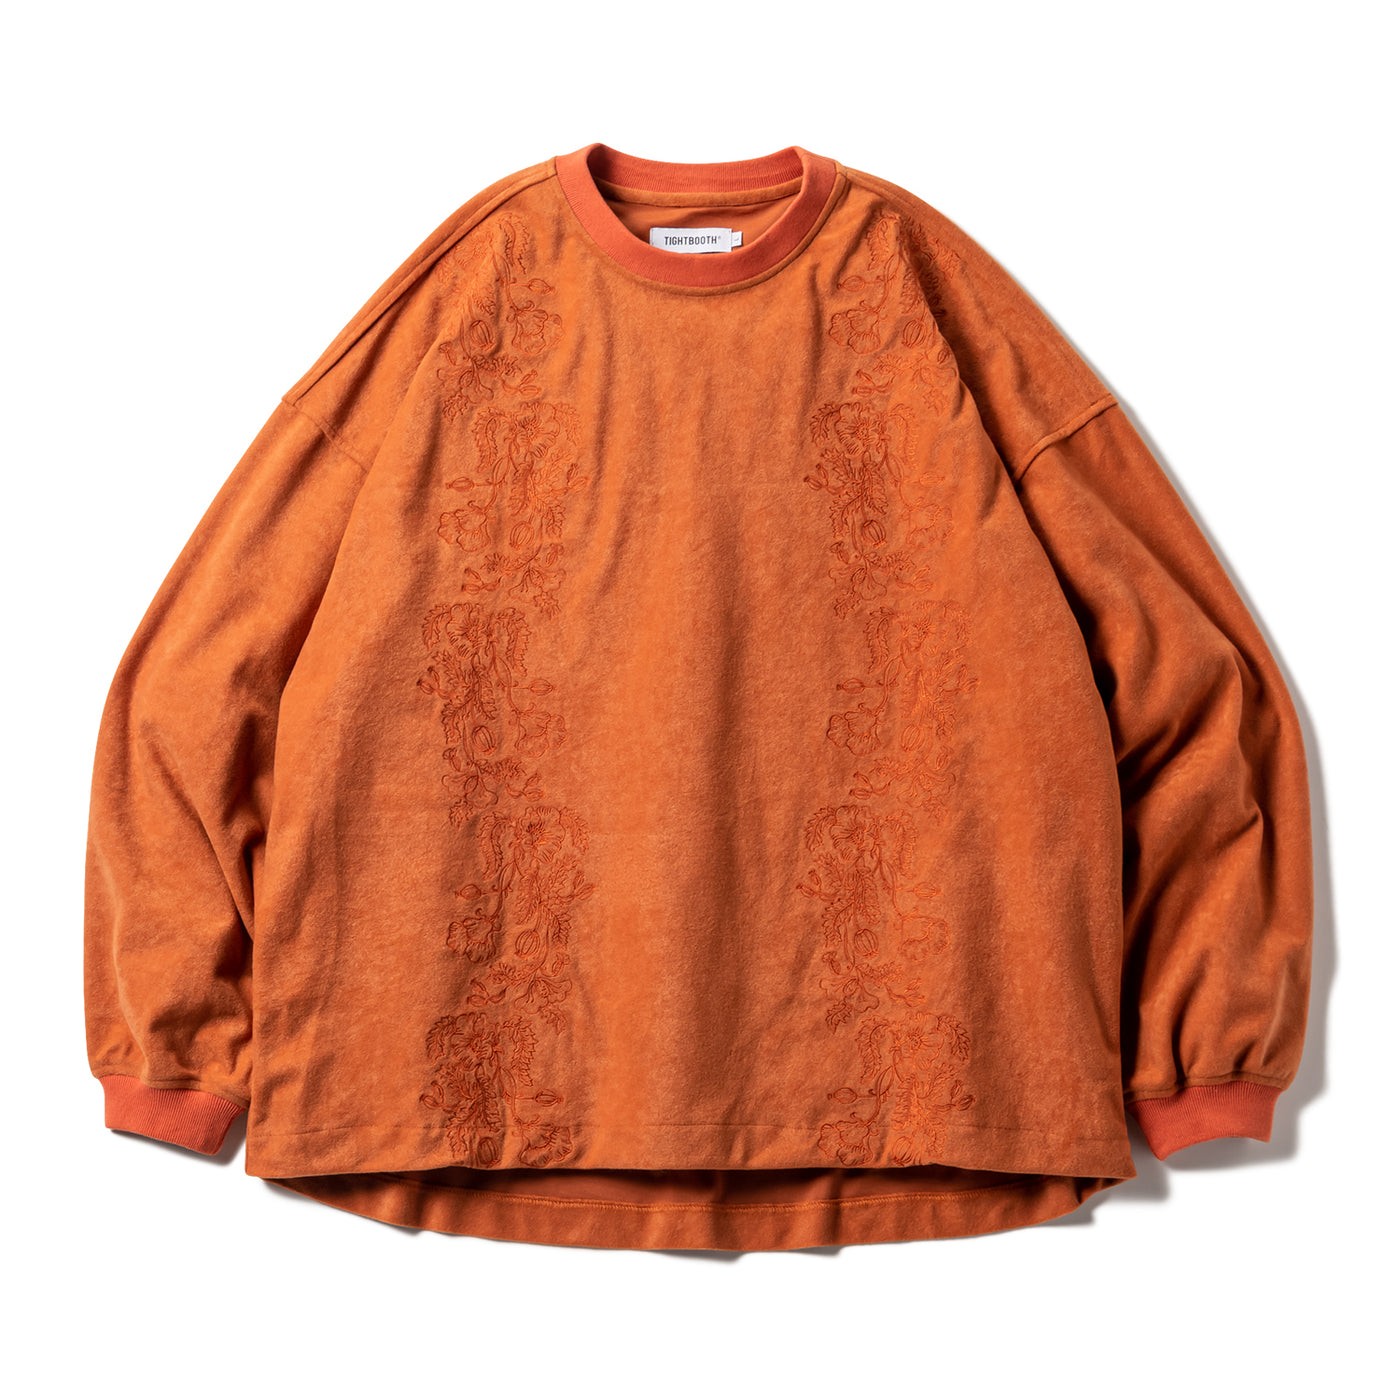 POPPY SUEDE L/S TOP - TIGHTBOOTH